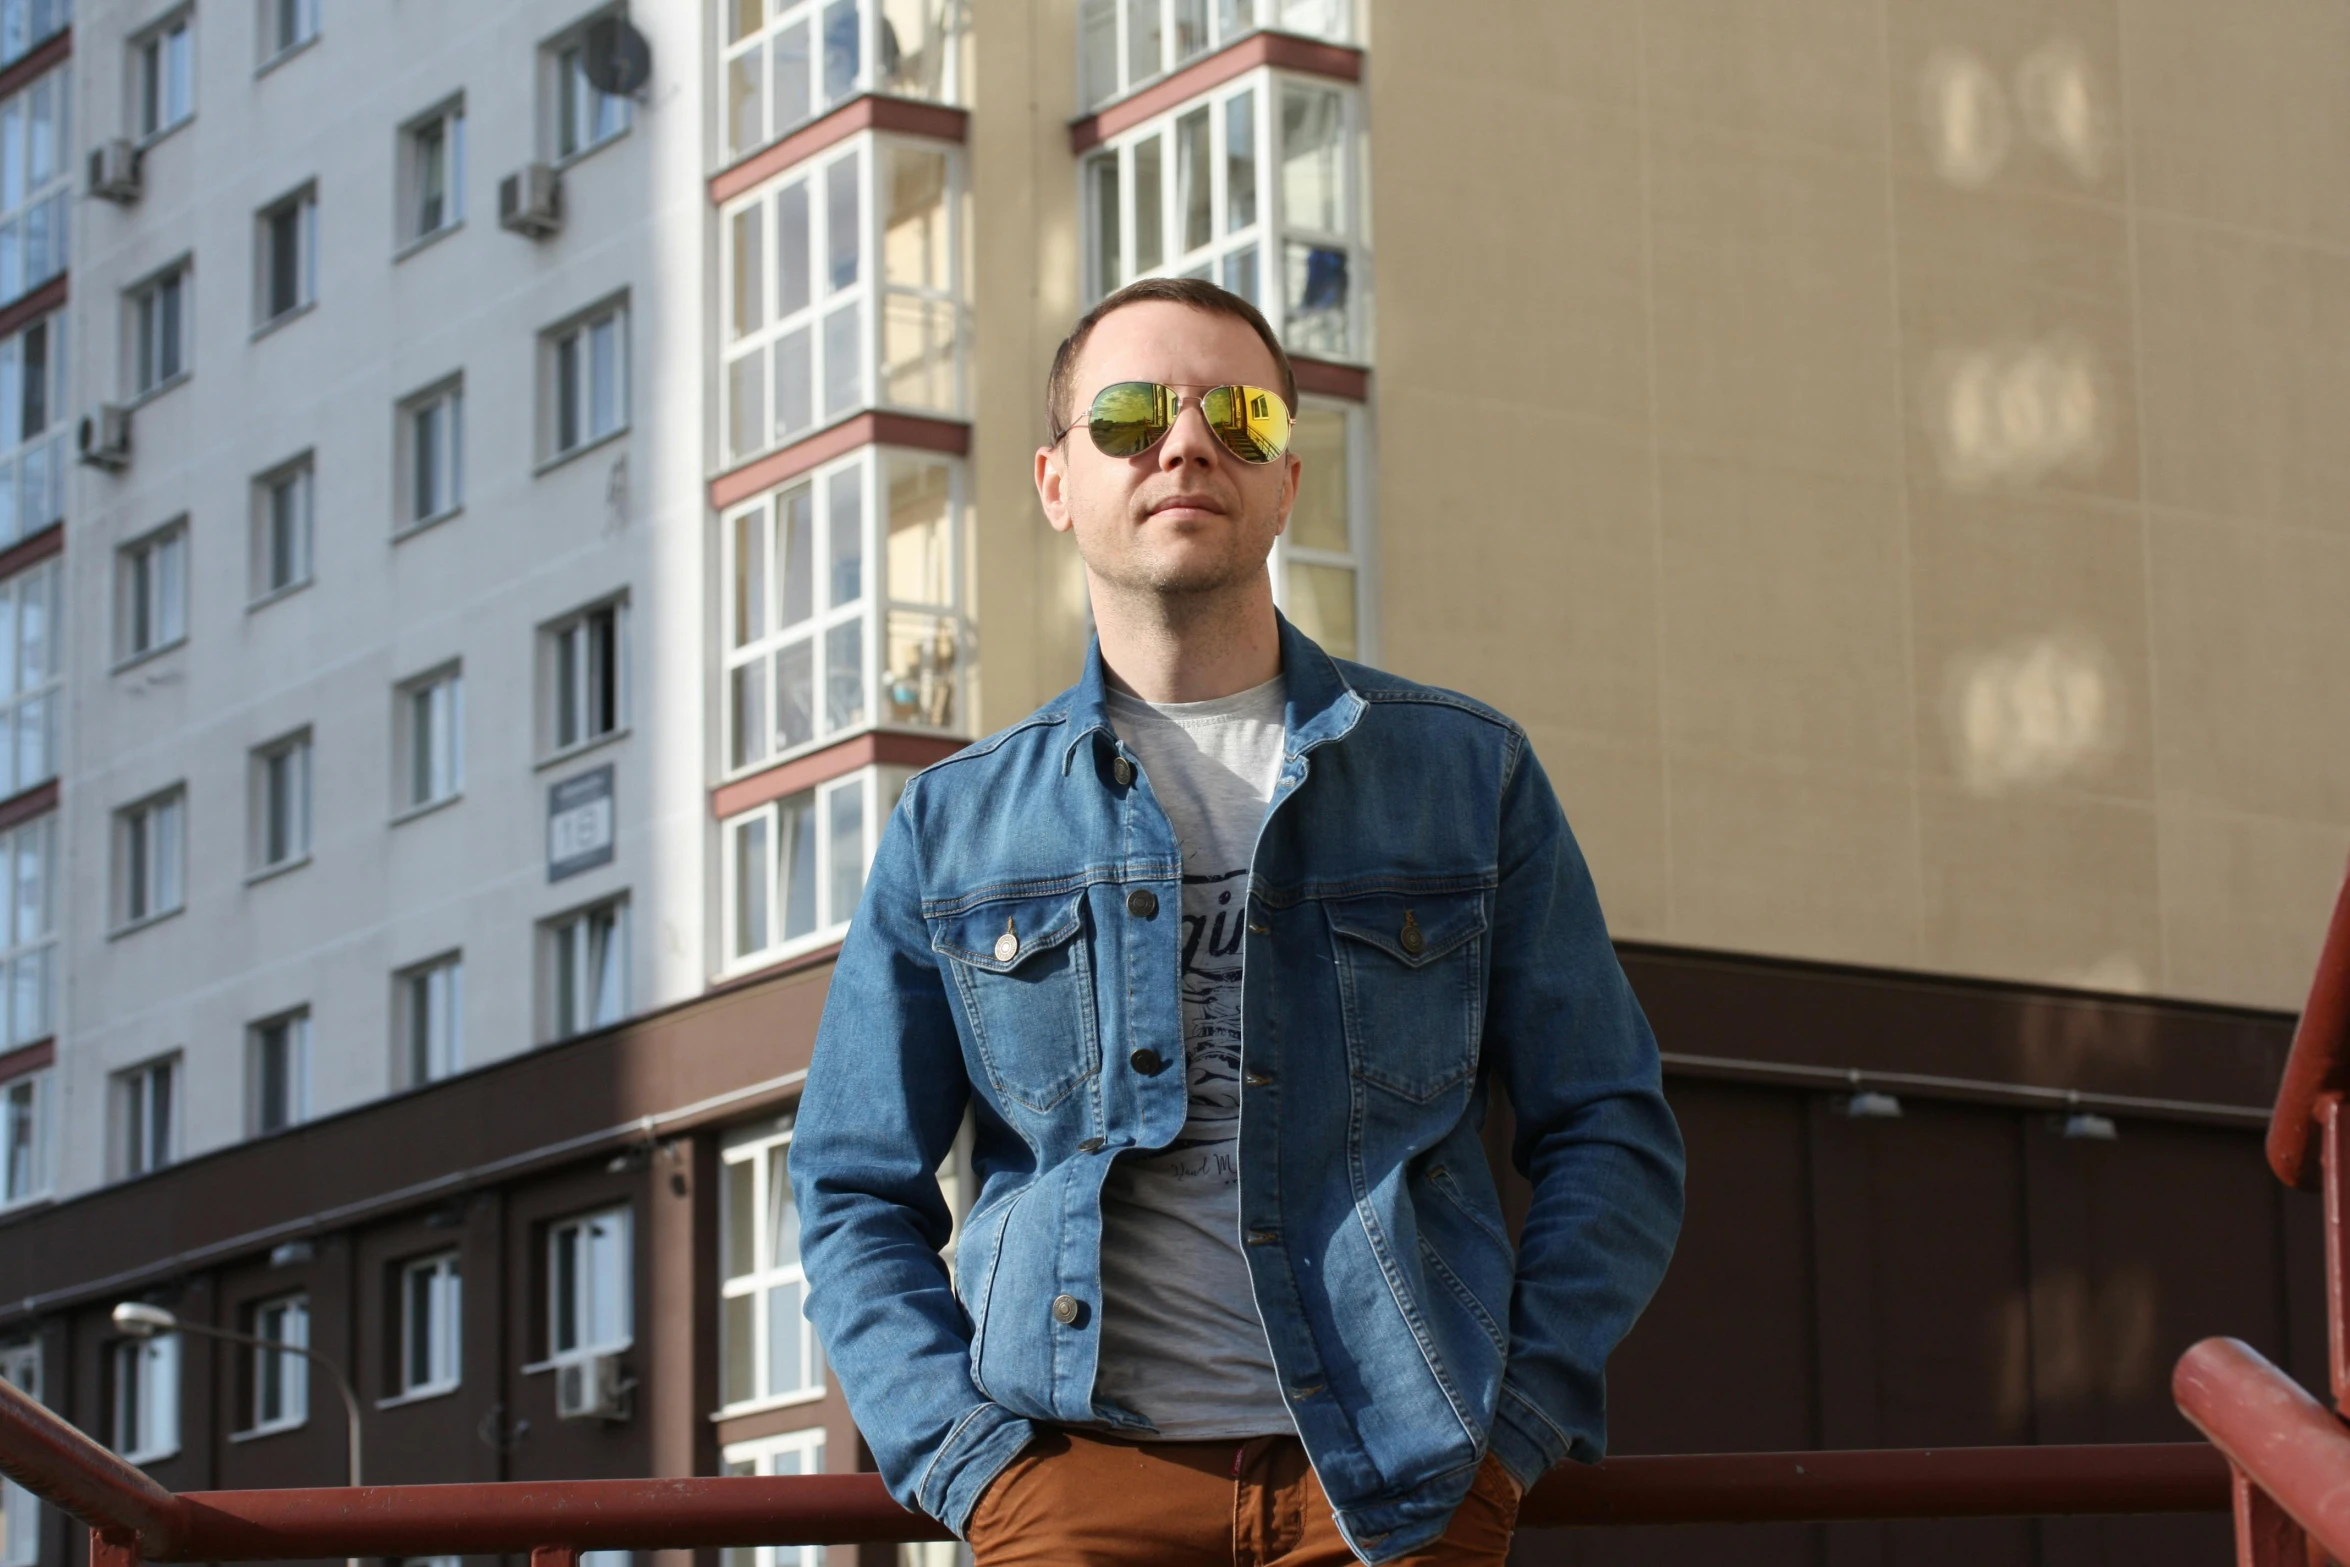 a man standing in front of some building wearing sunglasses